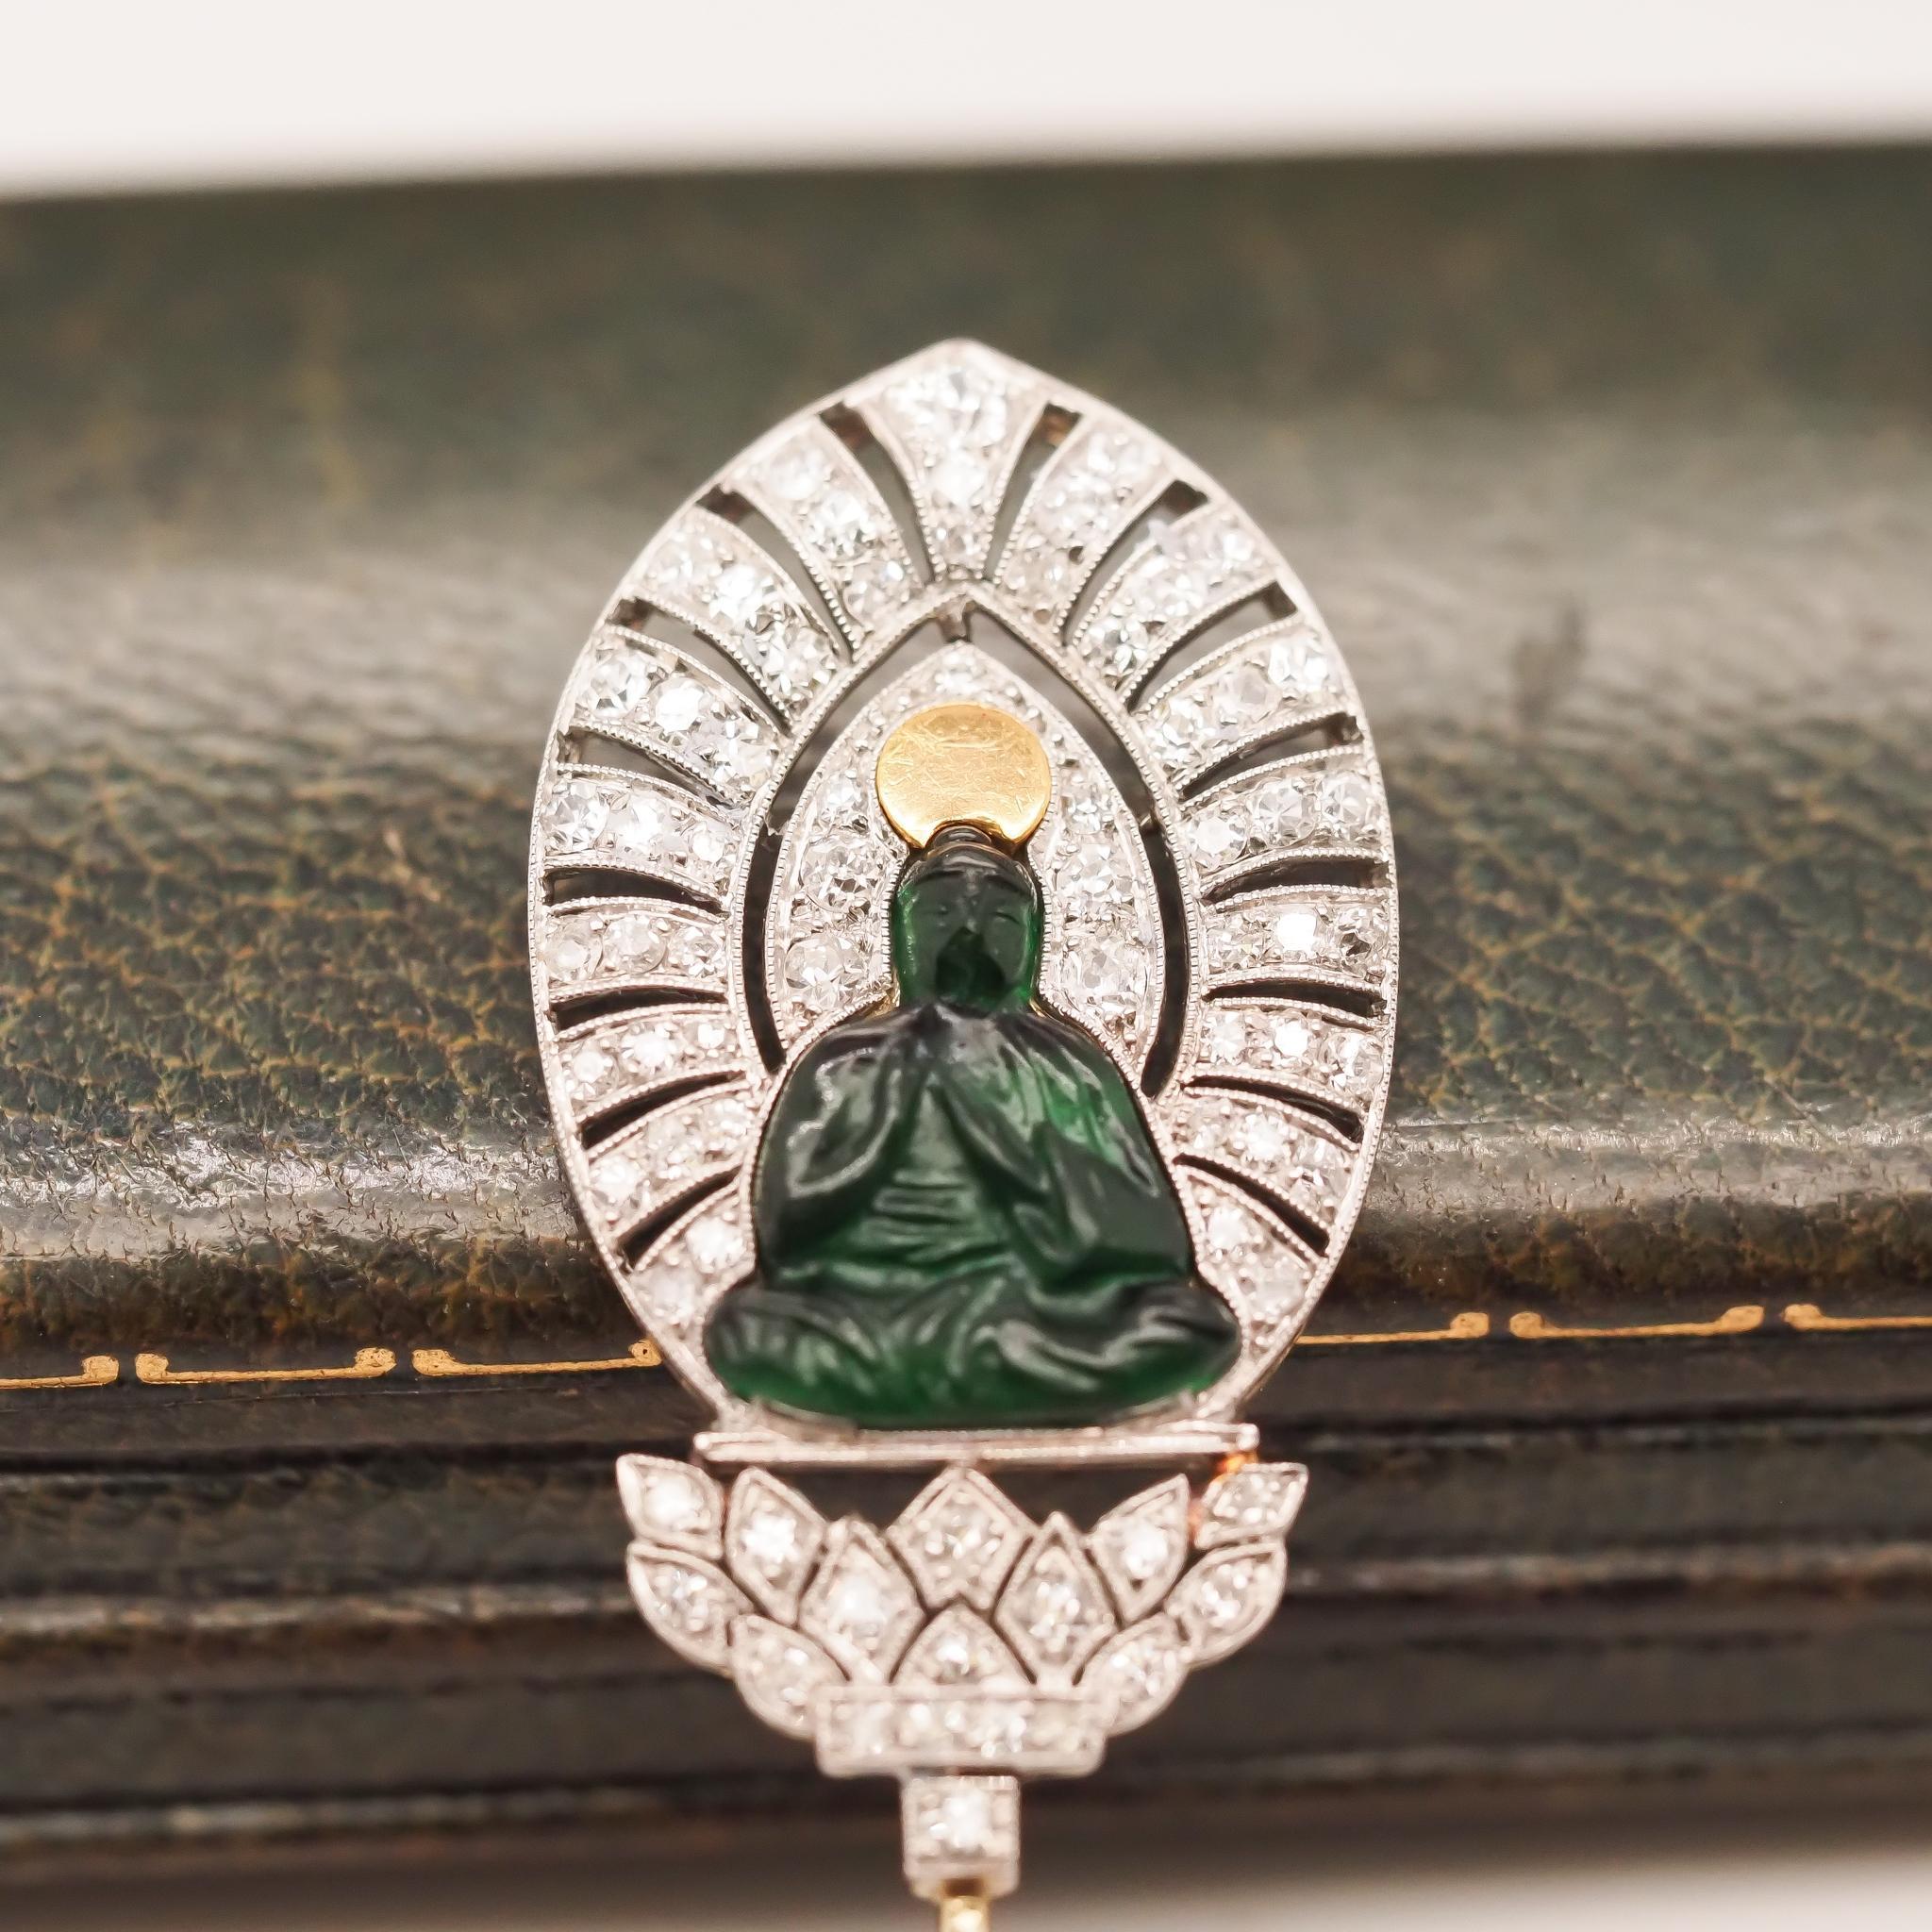 Circa 1900s Theodule Boudier French Jabot Pin with Buddha For Sale 3